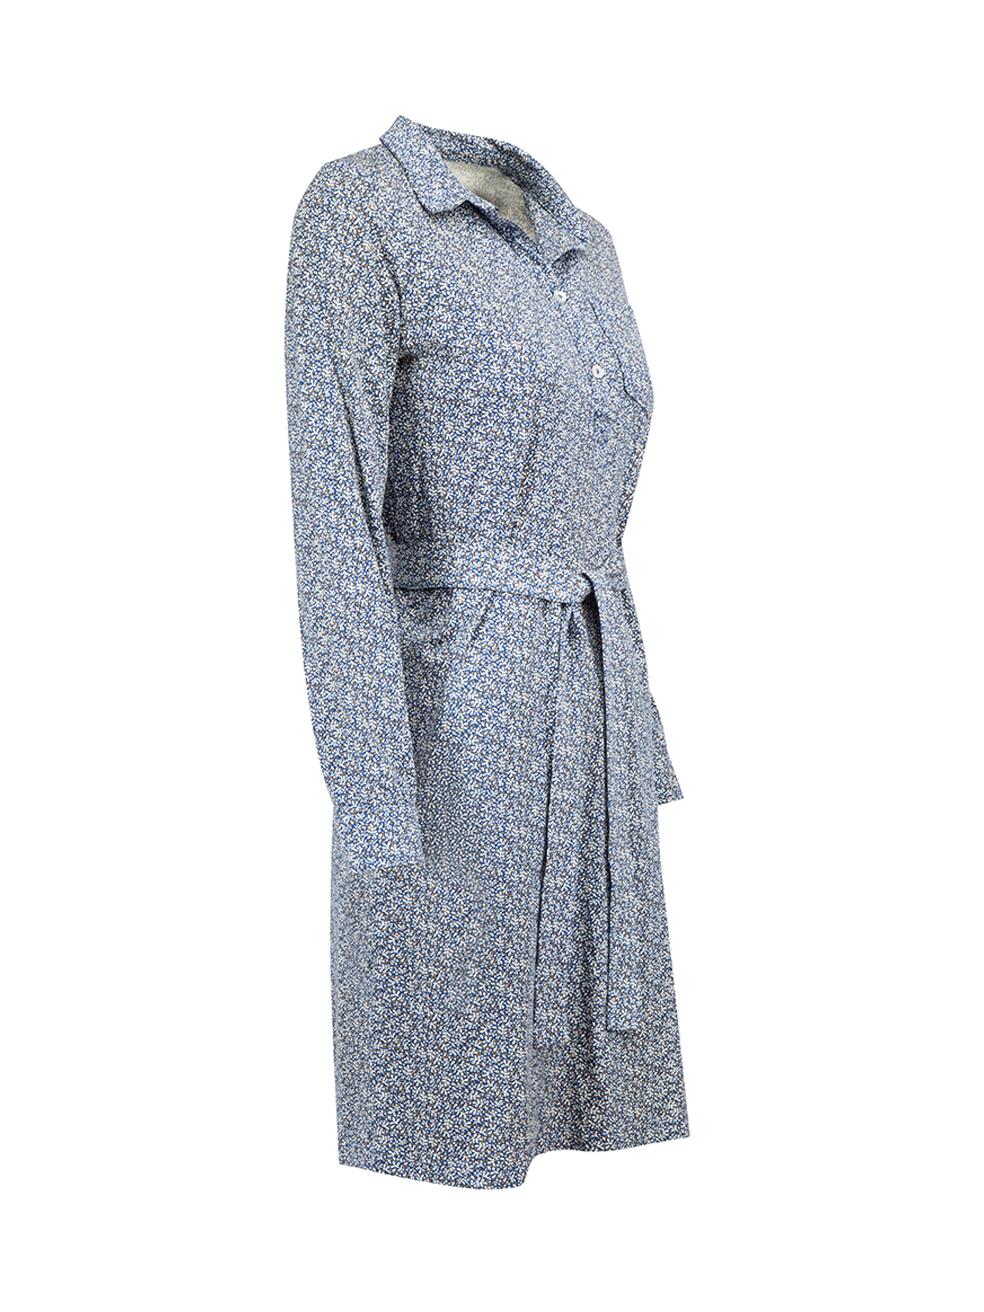 CONDITION is Very good. Hardly any visible wear to dress is evident on this used A.P.C. designer resale item.



Details


Blue

Cotton

Shirt dress

White and yellow abstract print

Half button fastening

1x Button on each cuff

1x Front patch